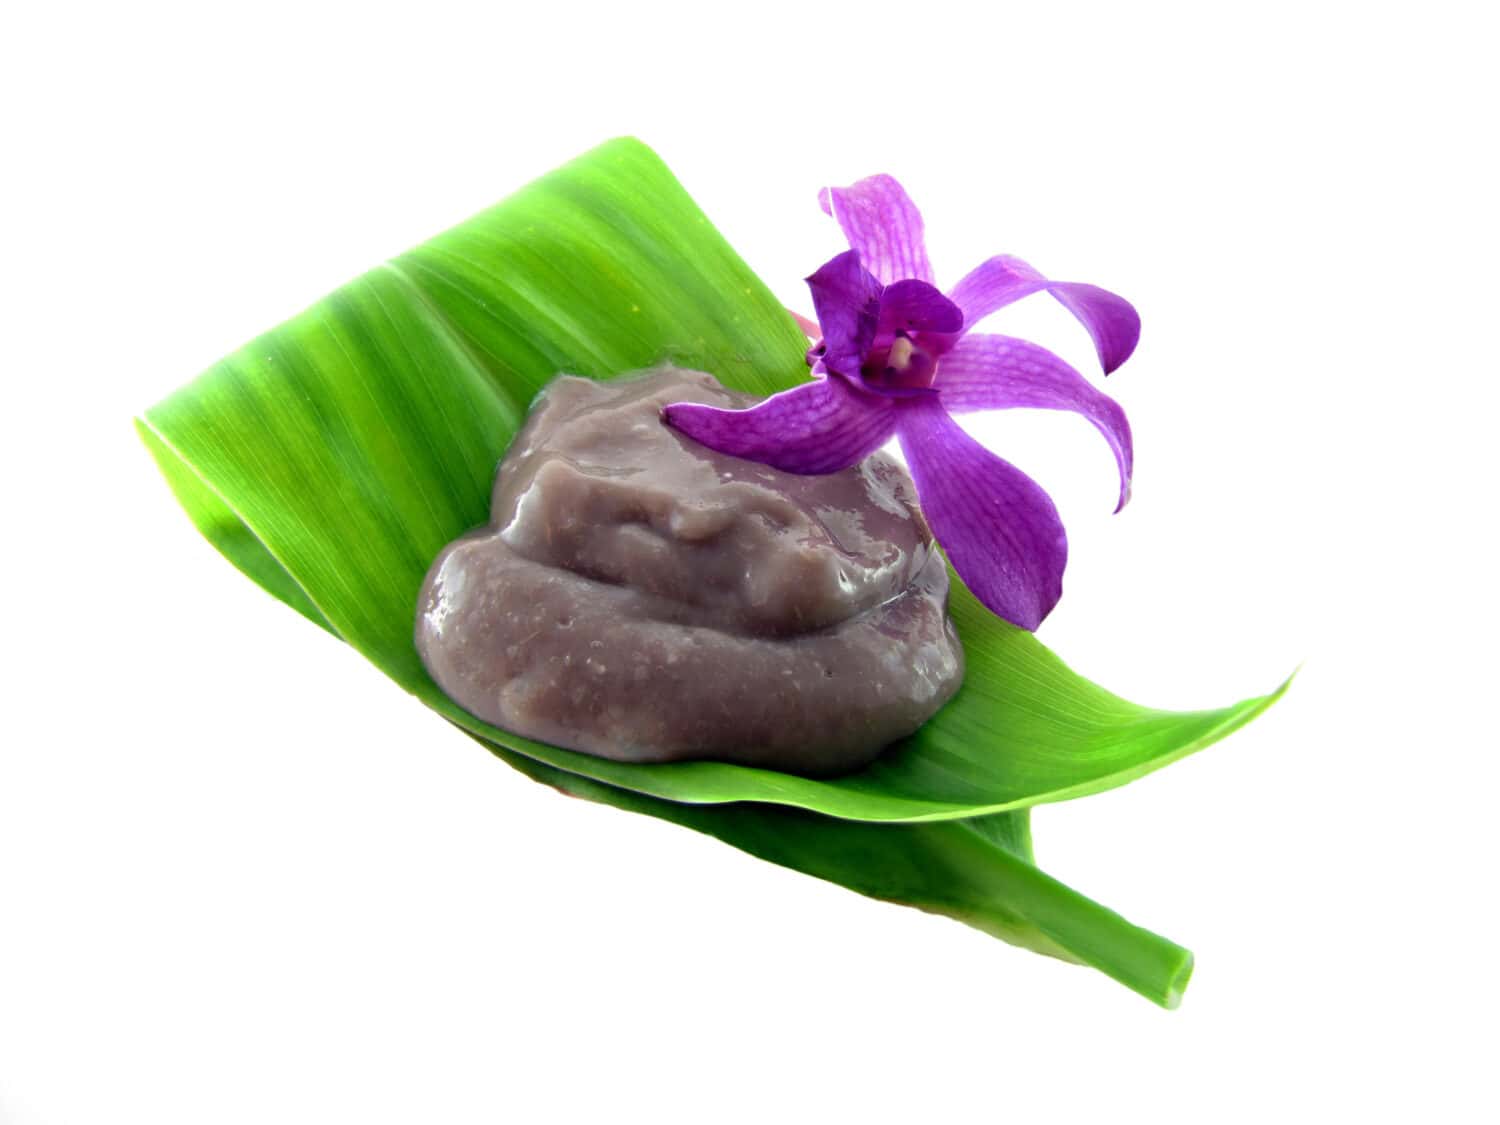 Poi on a tea leaf with an orchid isolated on white. A popular food in Hawaii made with taro, typically eaten by scooping with two fingers.